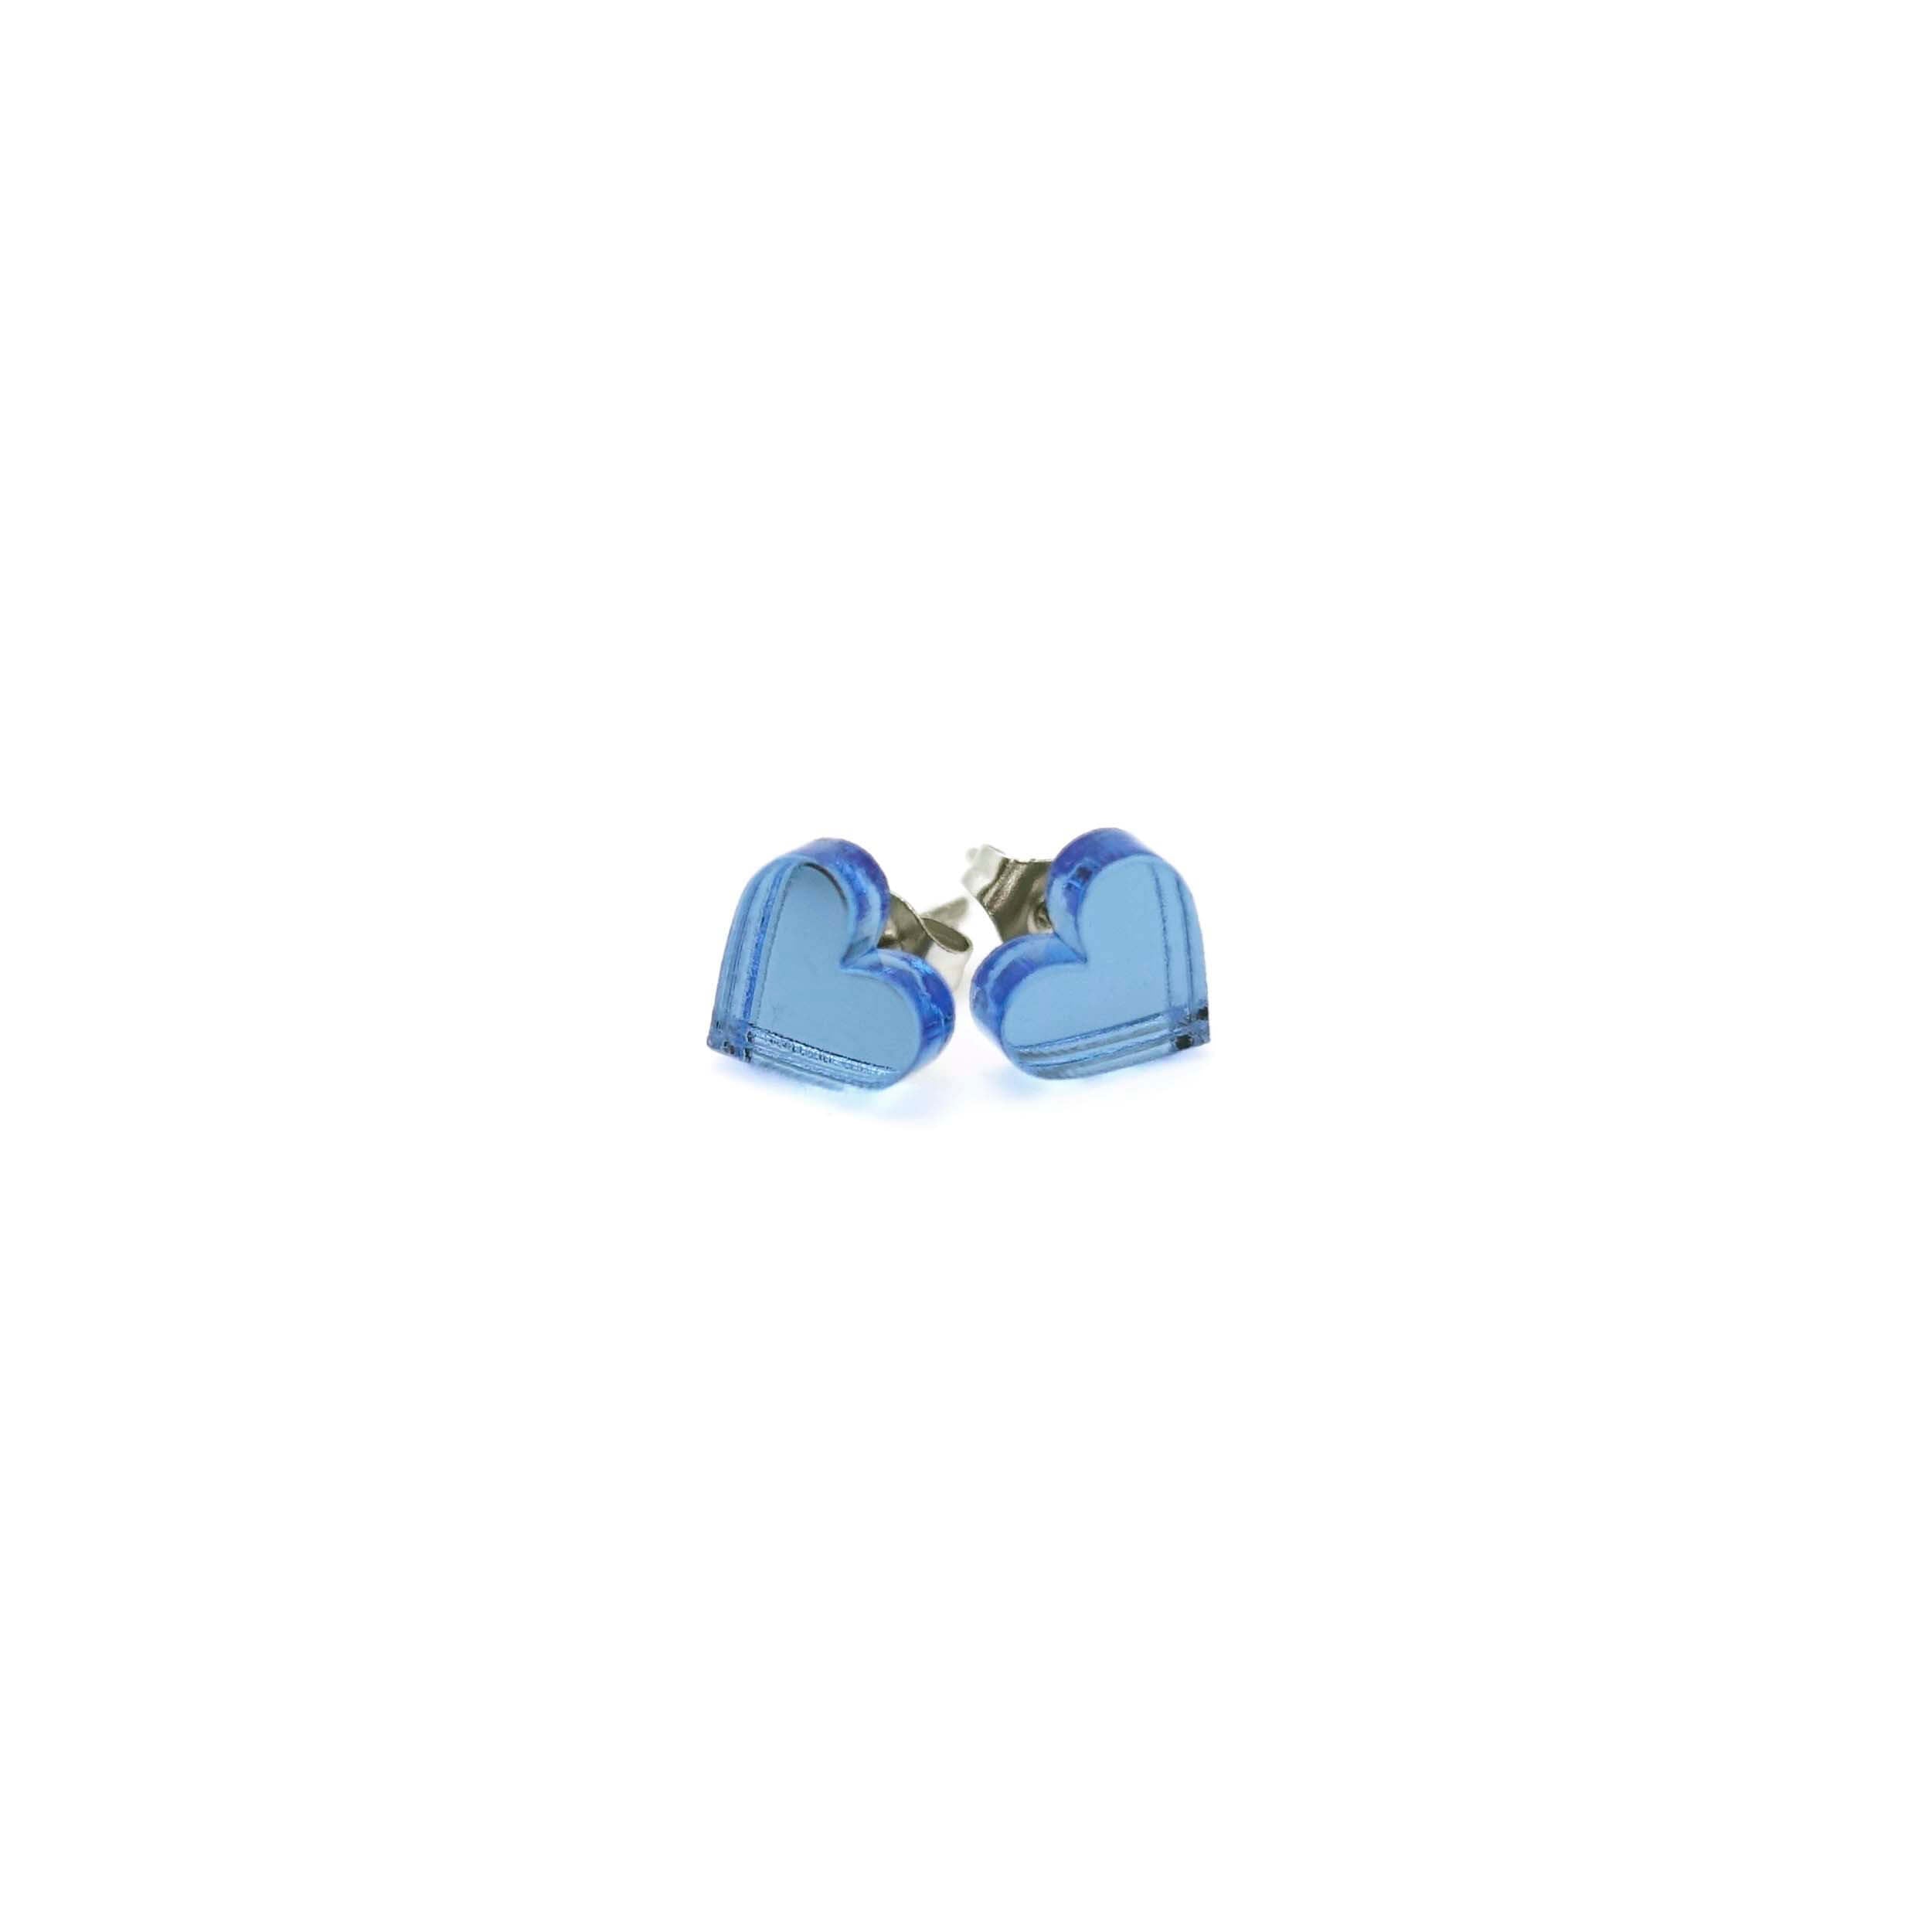 Sky mirror tiny heart stud earrings shown on a white background. 